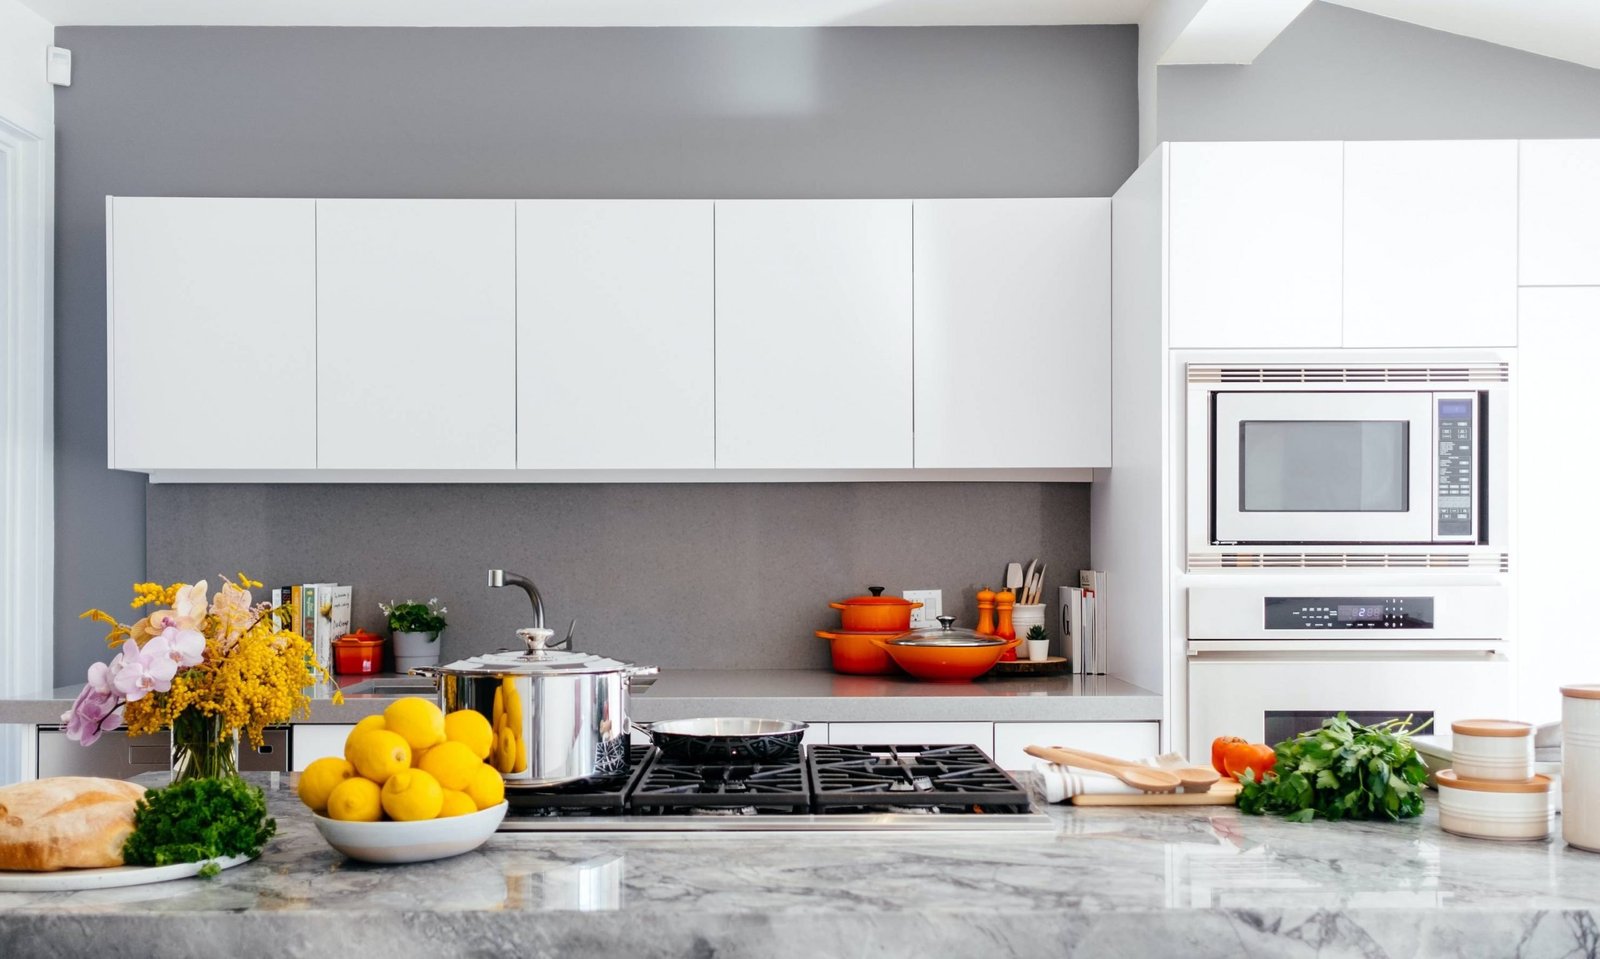 different types of countertops